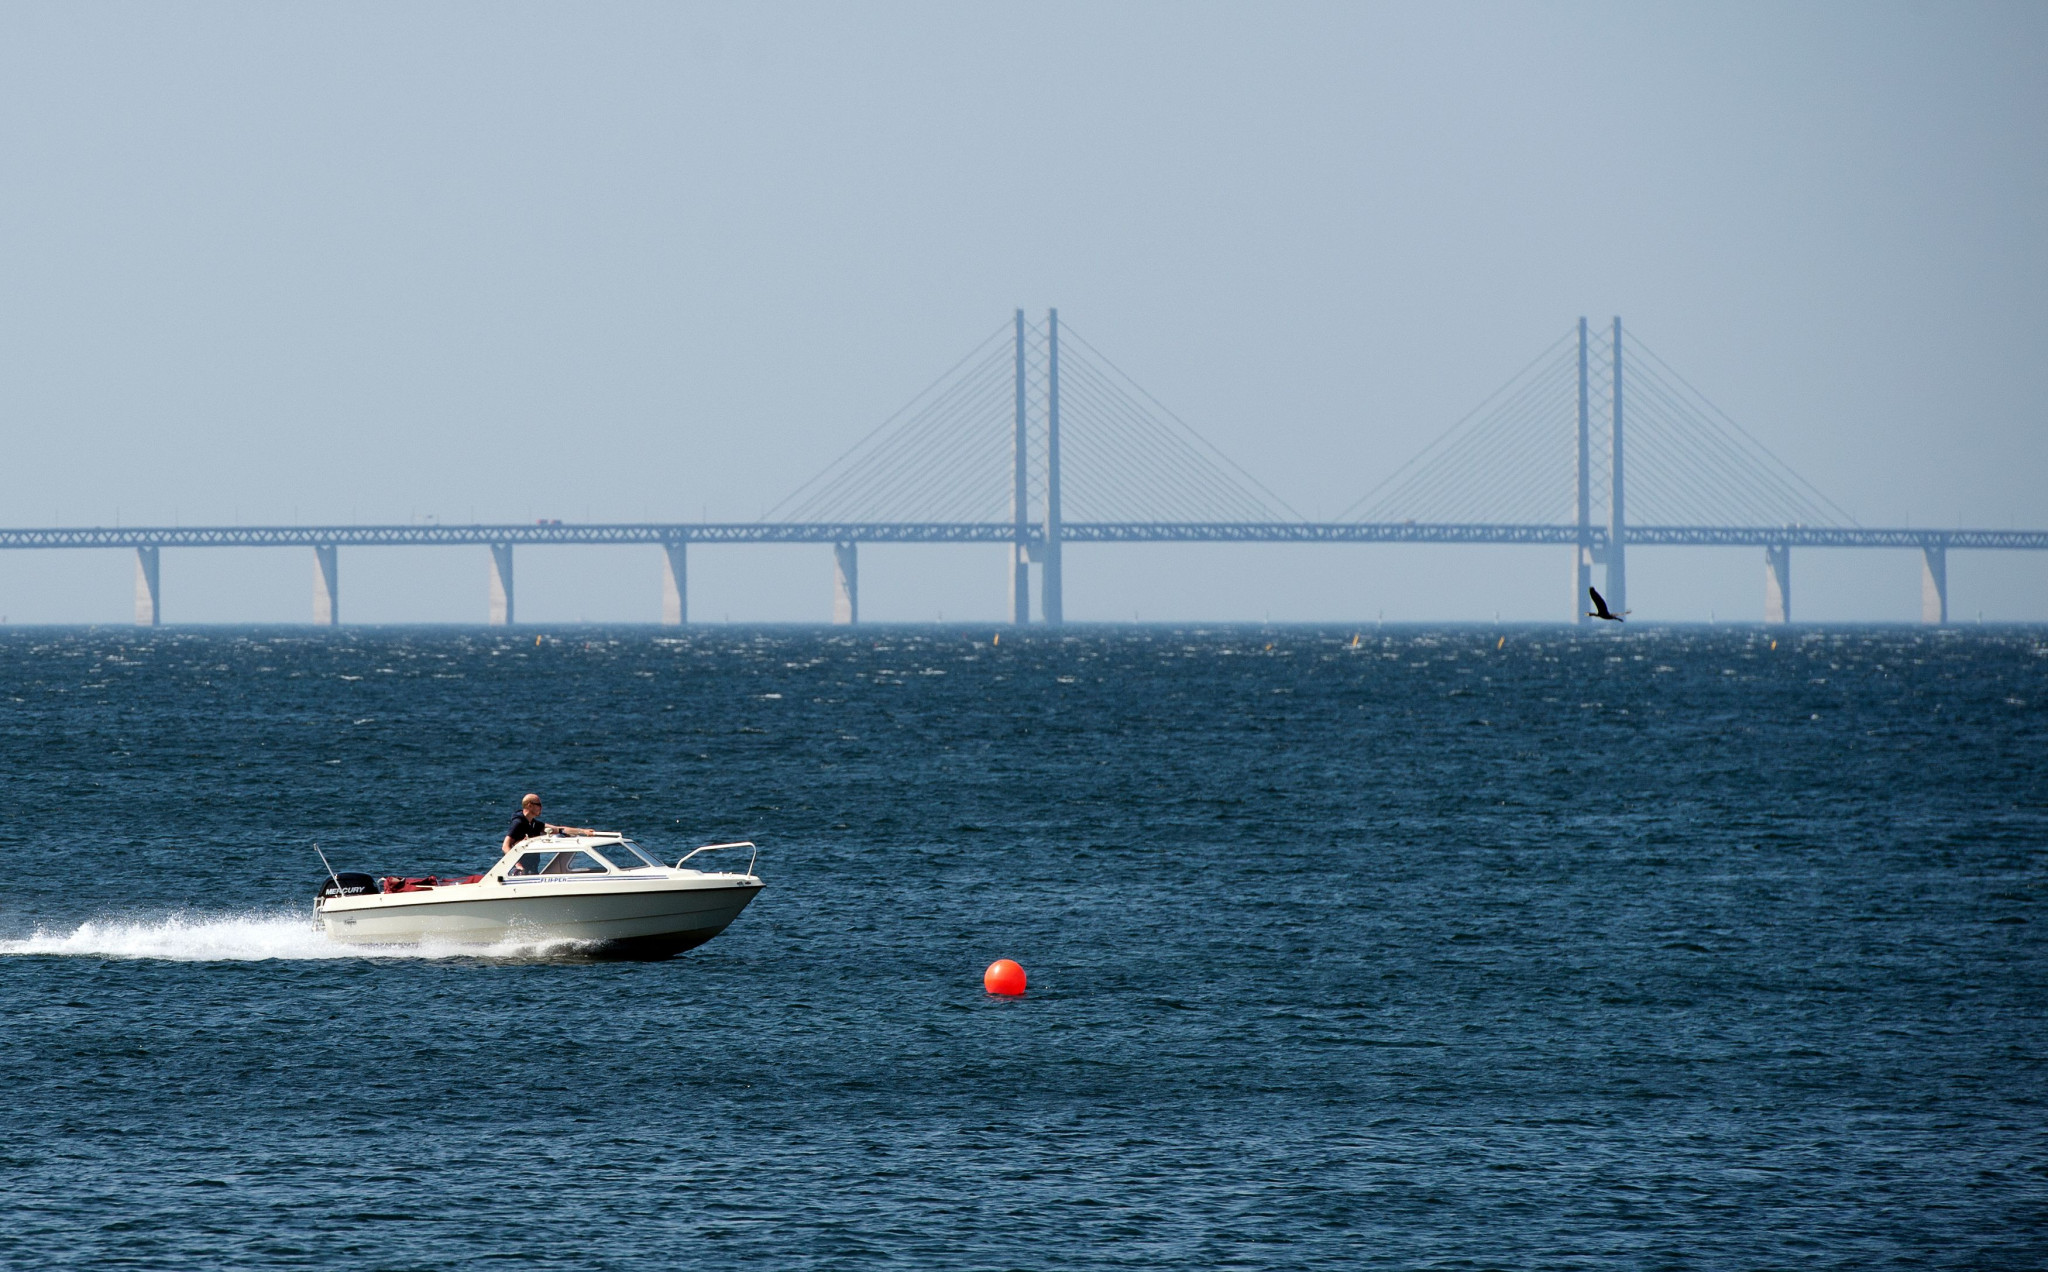 Sweden and Denamrk, on both sides of the Öresund Bridge, will both aim to benefit from the tournament ©WFDF